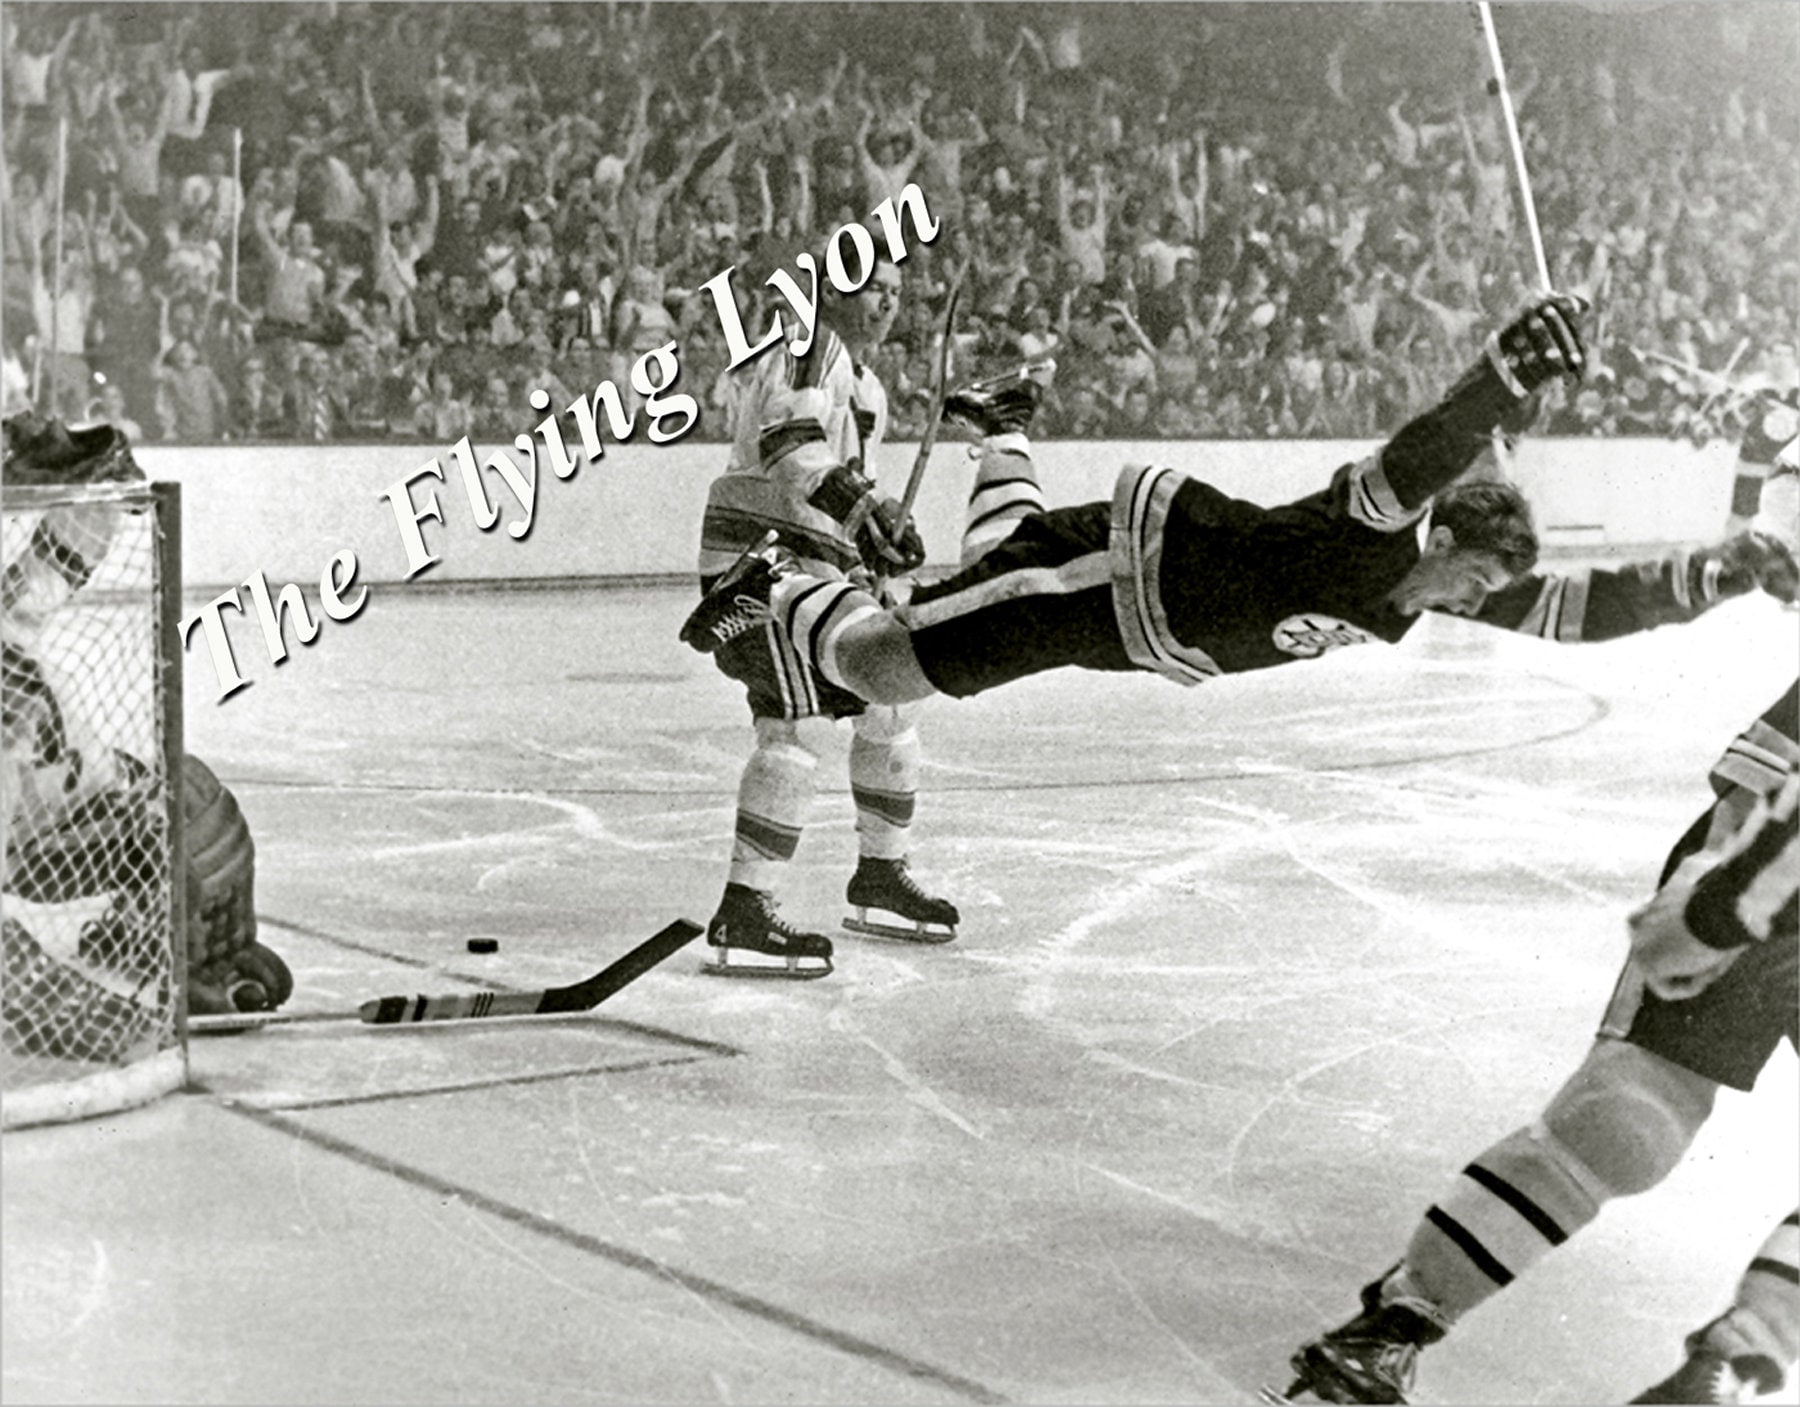  Bobby Orr The Flying Goal Poster Art Photo Hockey Greats NHL  Posters Photos 12x18 : Sports & Outdoors